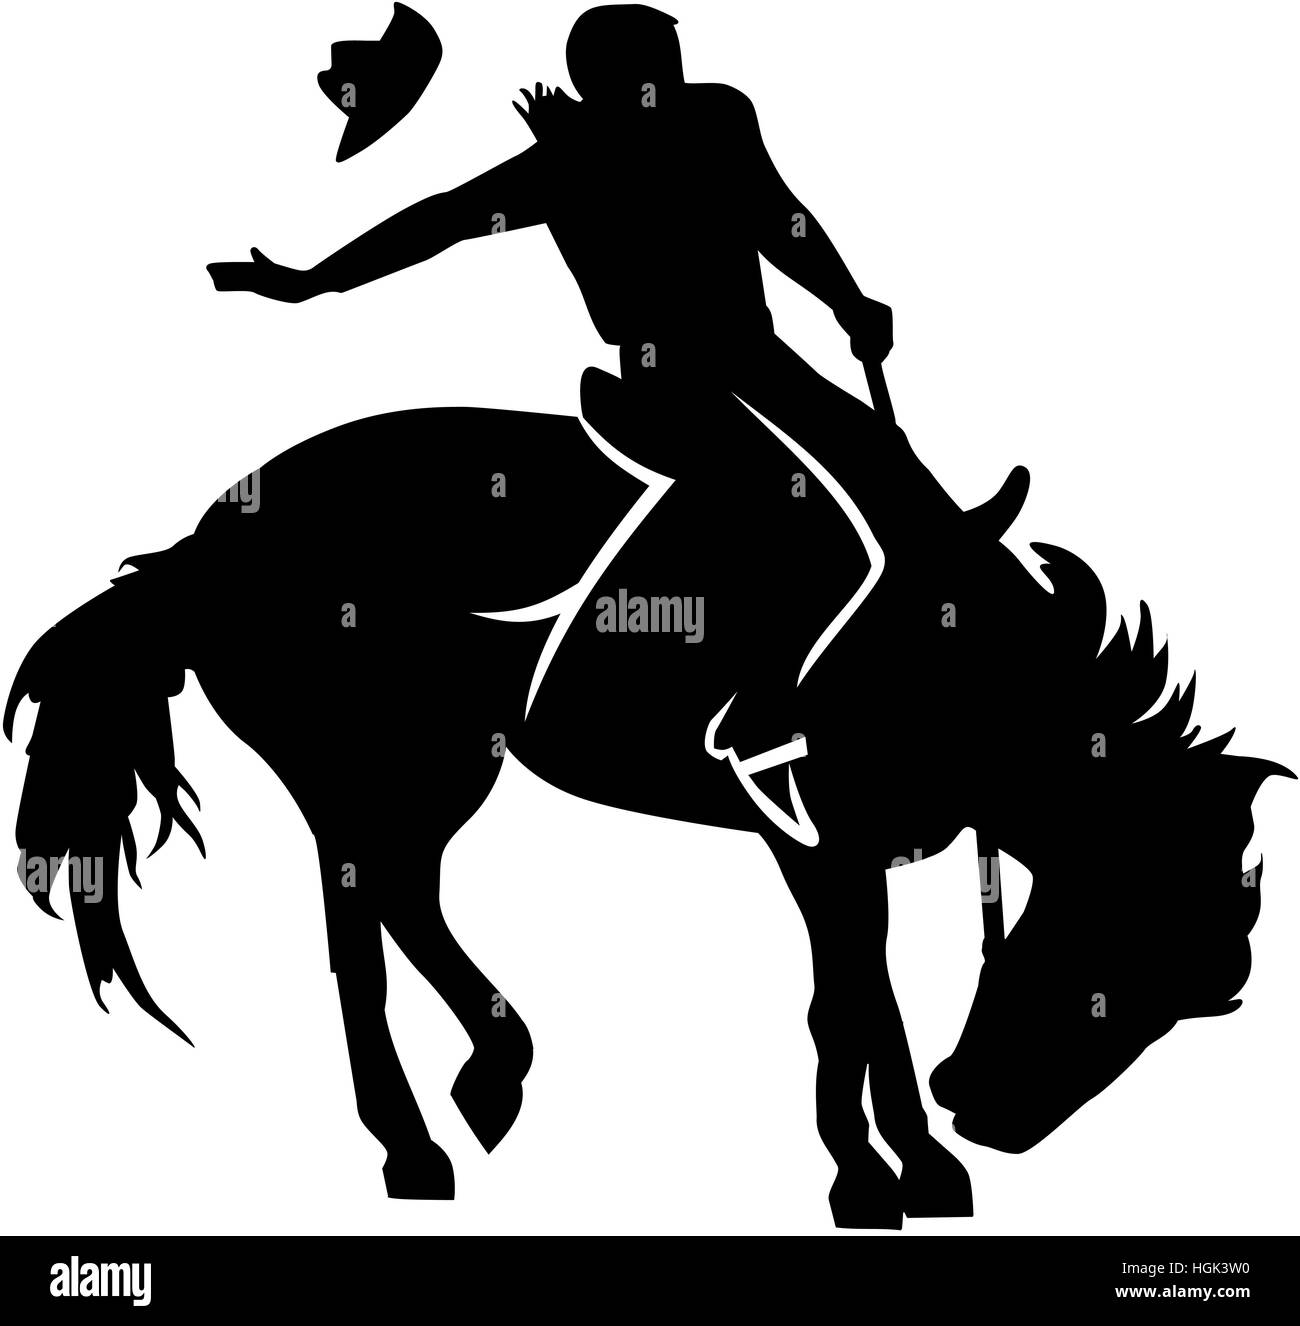 Rodeo riding silhouette Stock Photo